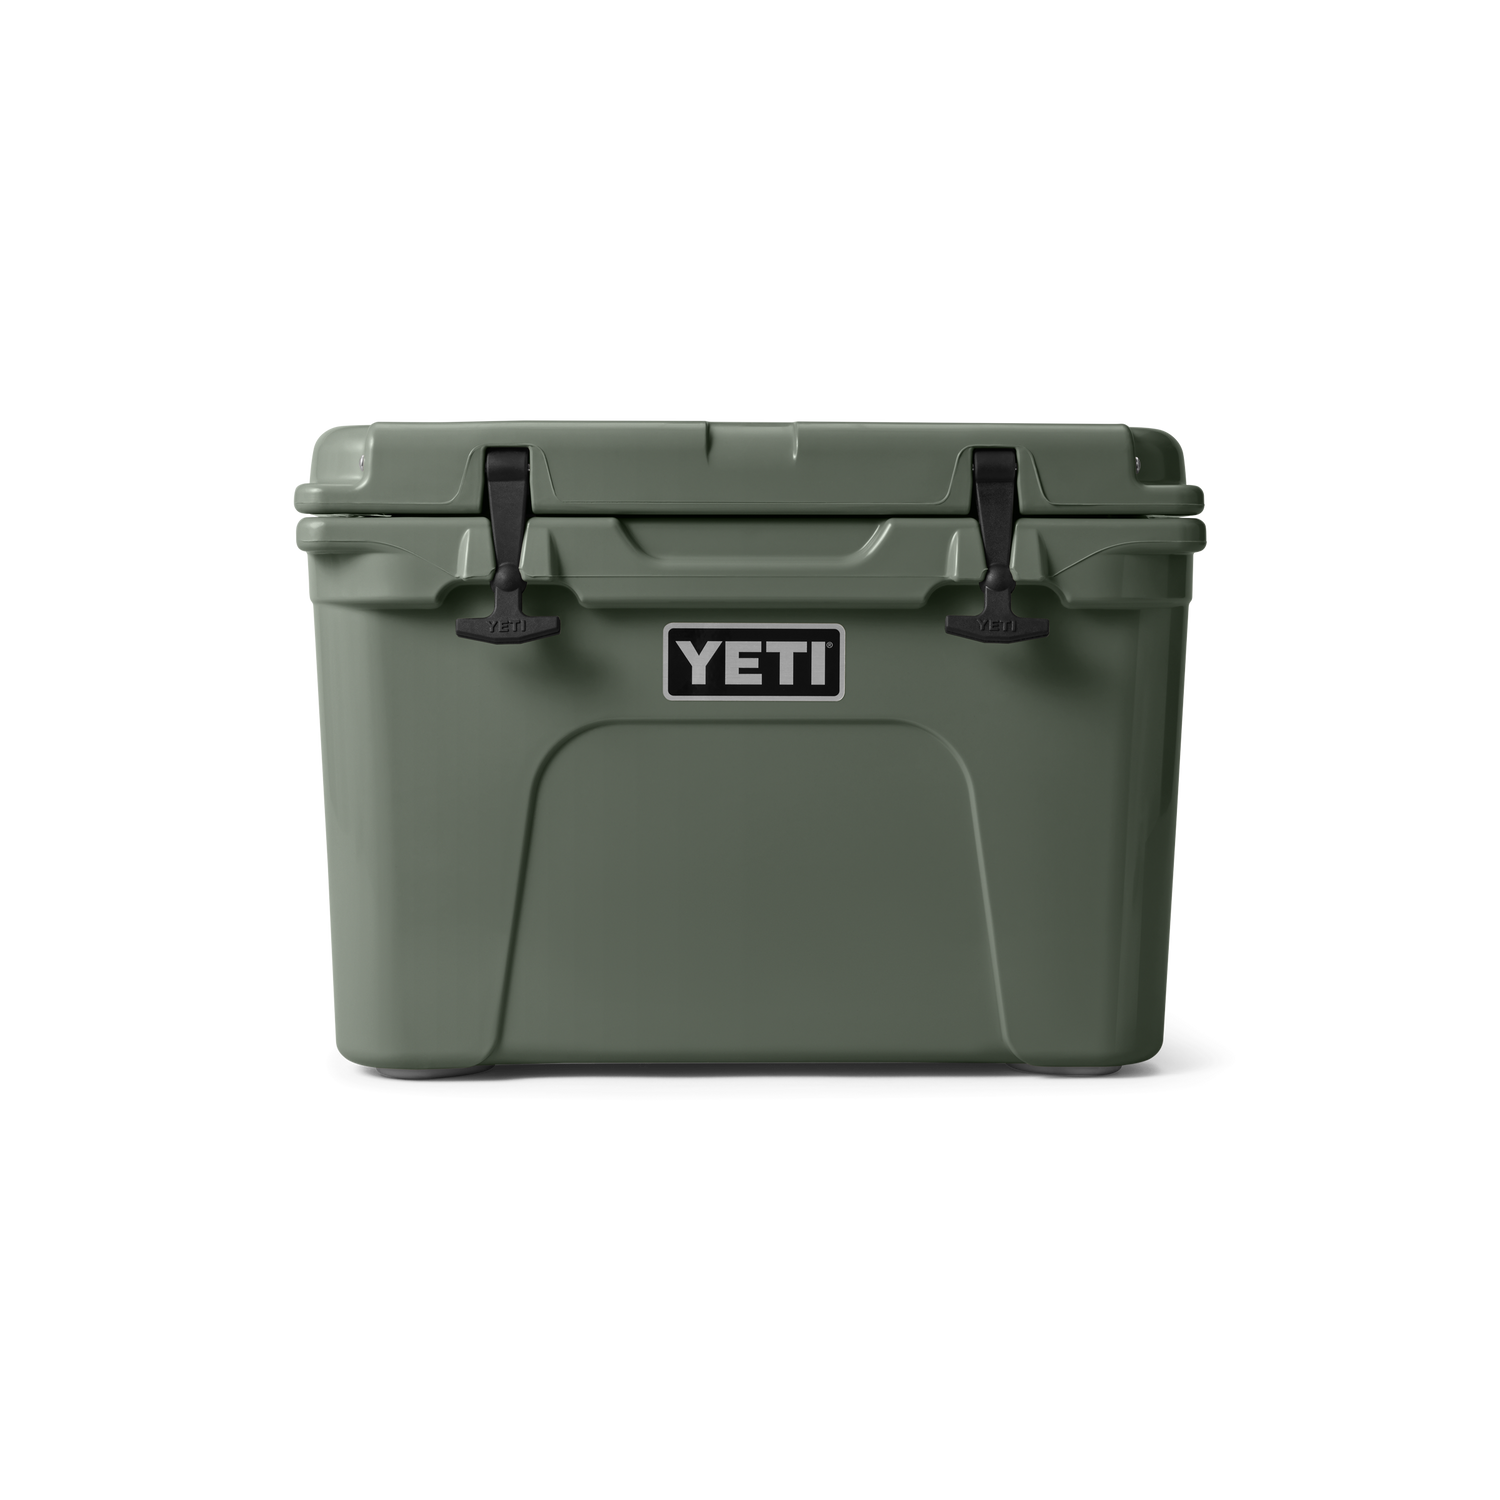 YETI Cool Boxes, Ice Chests, And Hard Coolers – YETI UK LIMITED